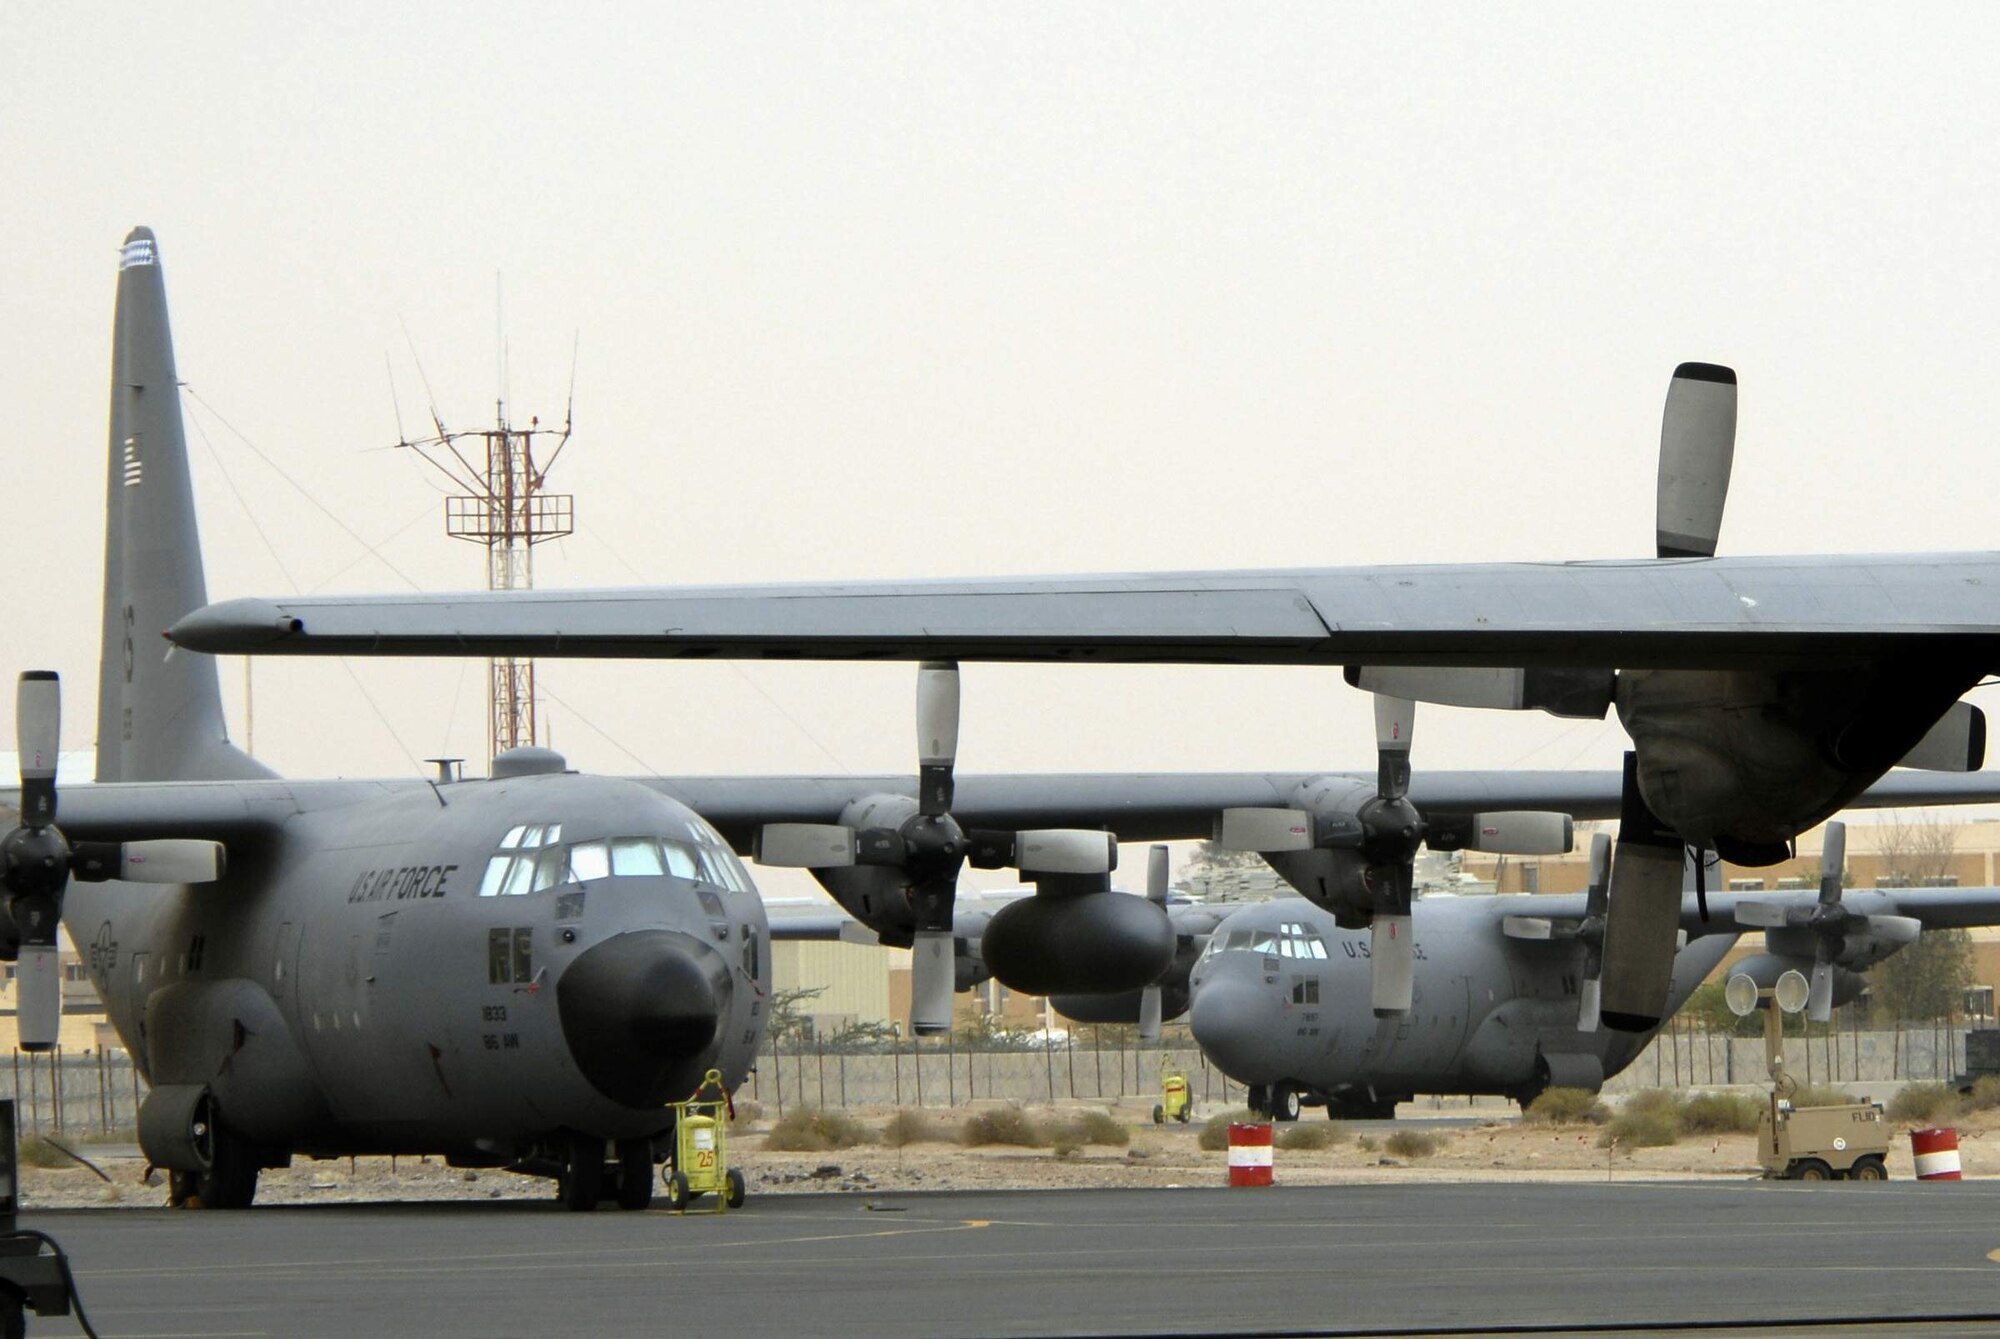 C-130 Hercules aircraft wait for an airlift mission April 17 at an air base in Southwest Asia. These C-130s transport coalition forces and equipment throughout the area of responsibility in support of operations Enduring Freedom and Iraqi Freedom (U.S. Air Force photo/Staff Sgt. Patrick Dixon)
